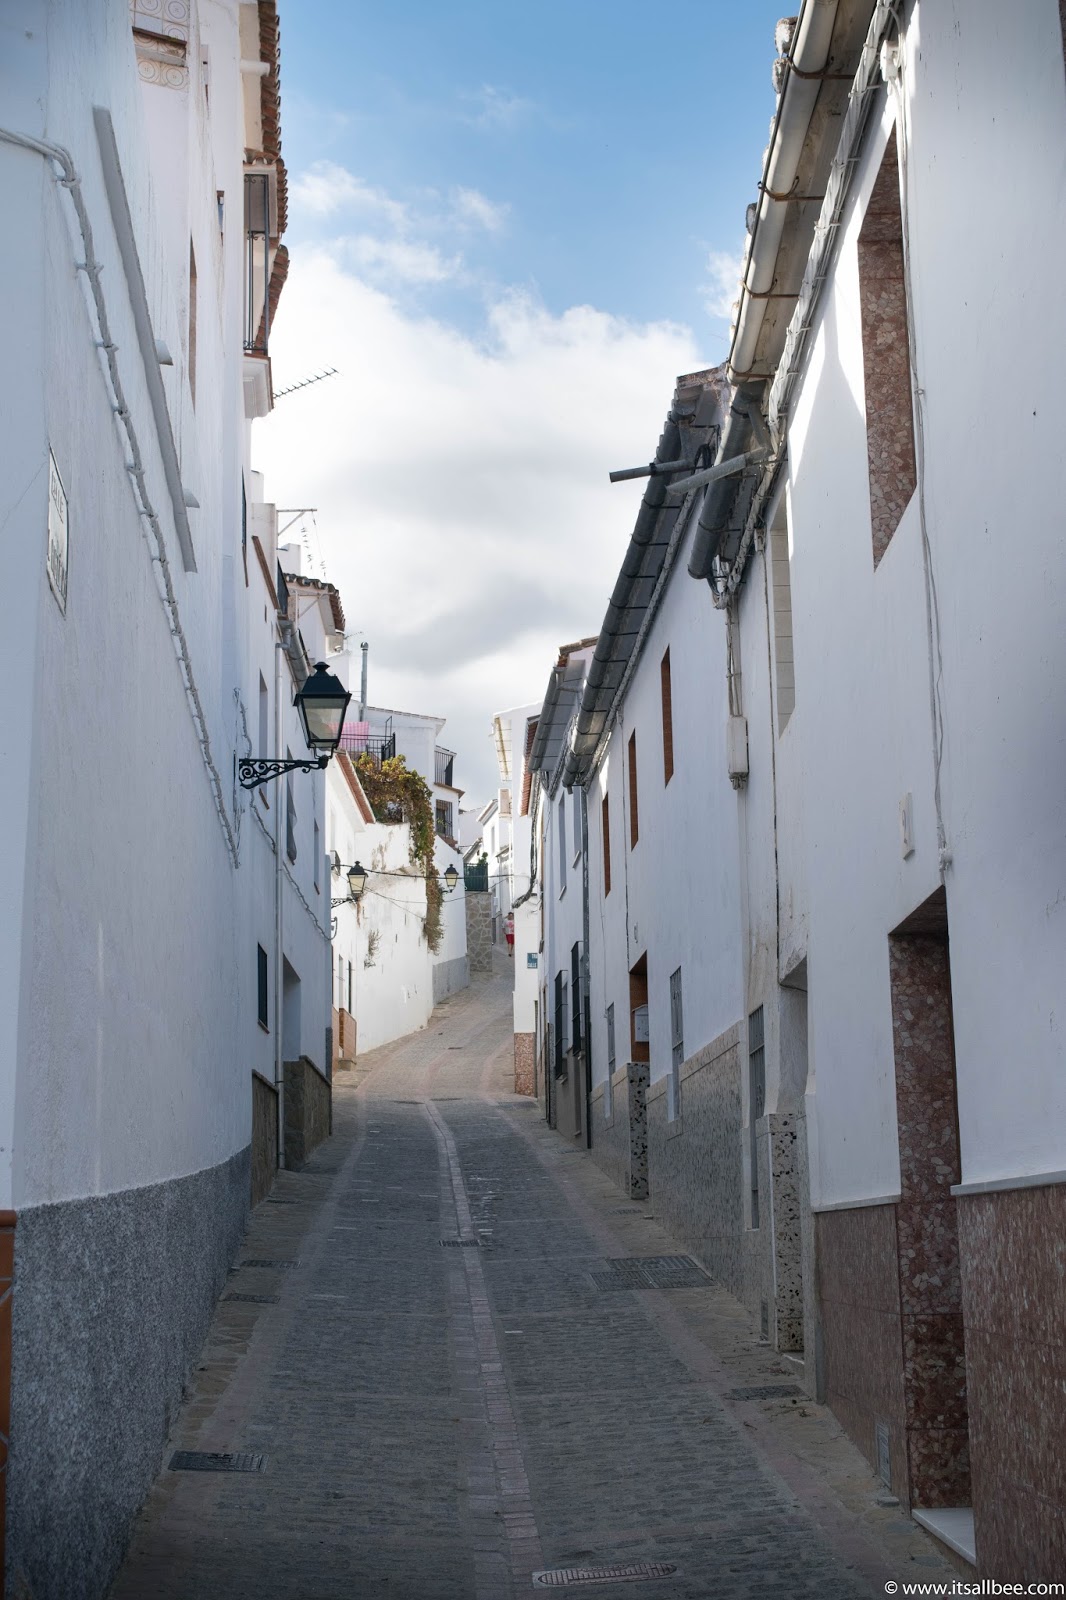 Andalucia Villas | 4 Ways To Experience Andalucia Like A Local